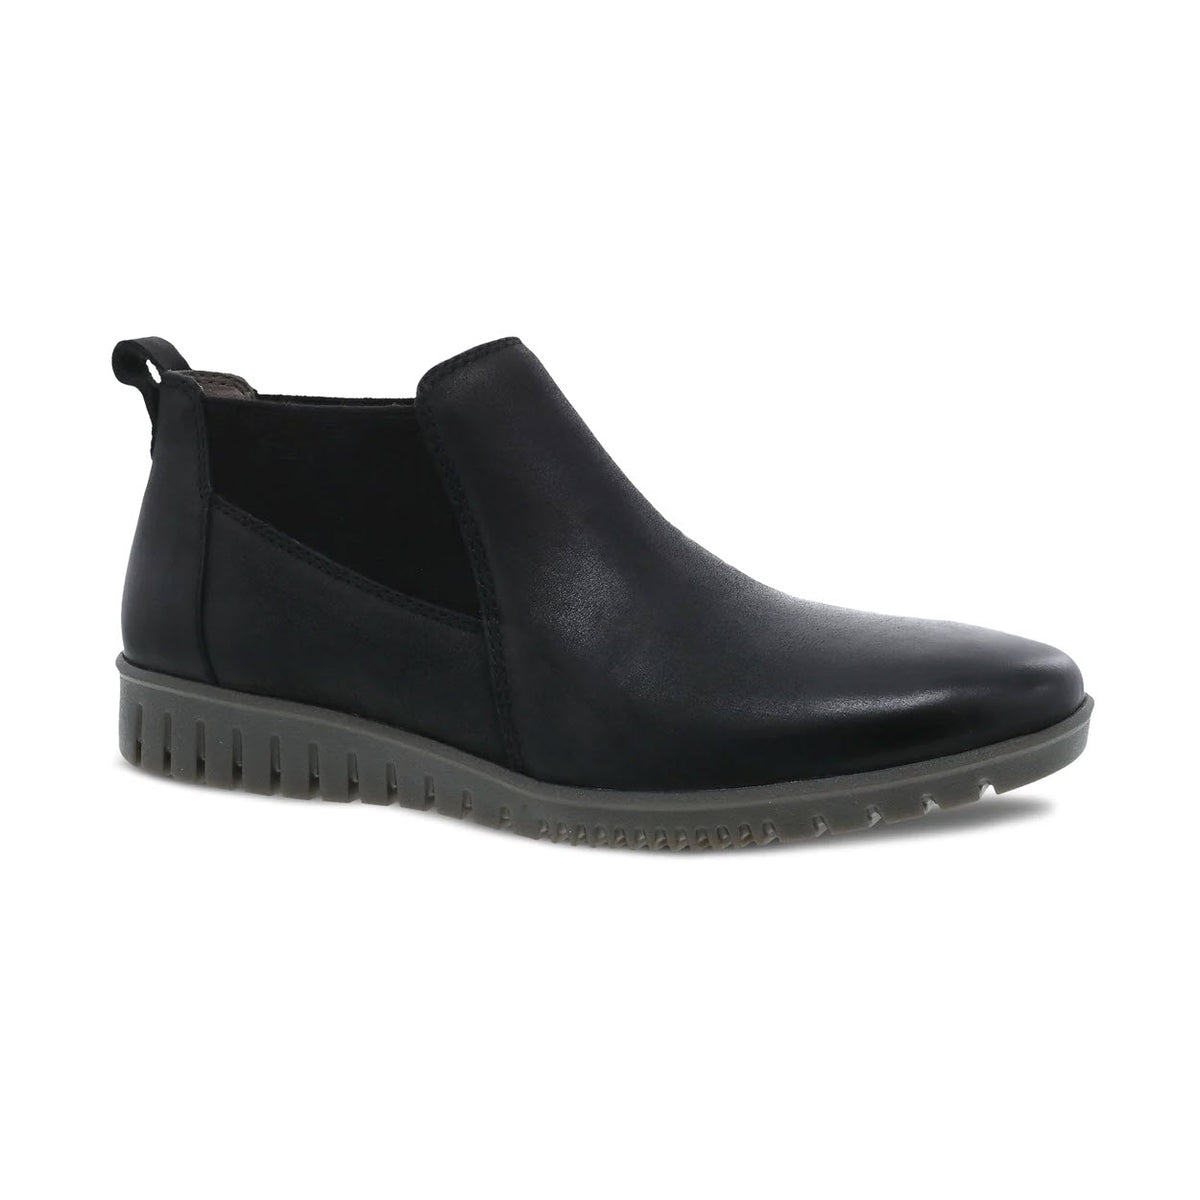 Black leather low-top bootie with a pull tab and a ridged rubber sole, displayed on a white background, the Dansko Louise Black Burnished - Womens.